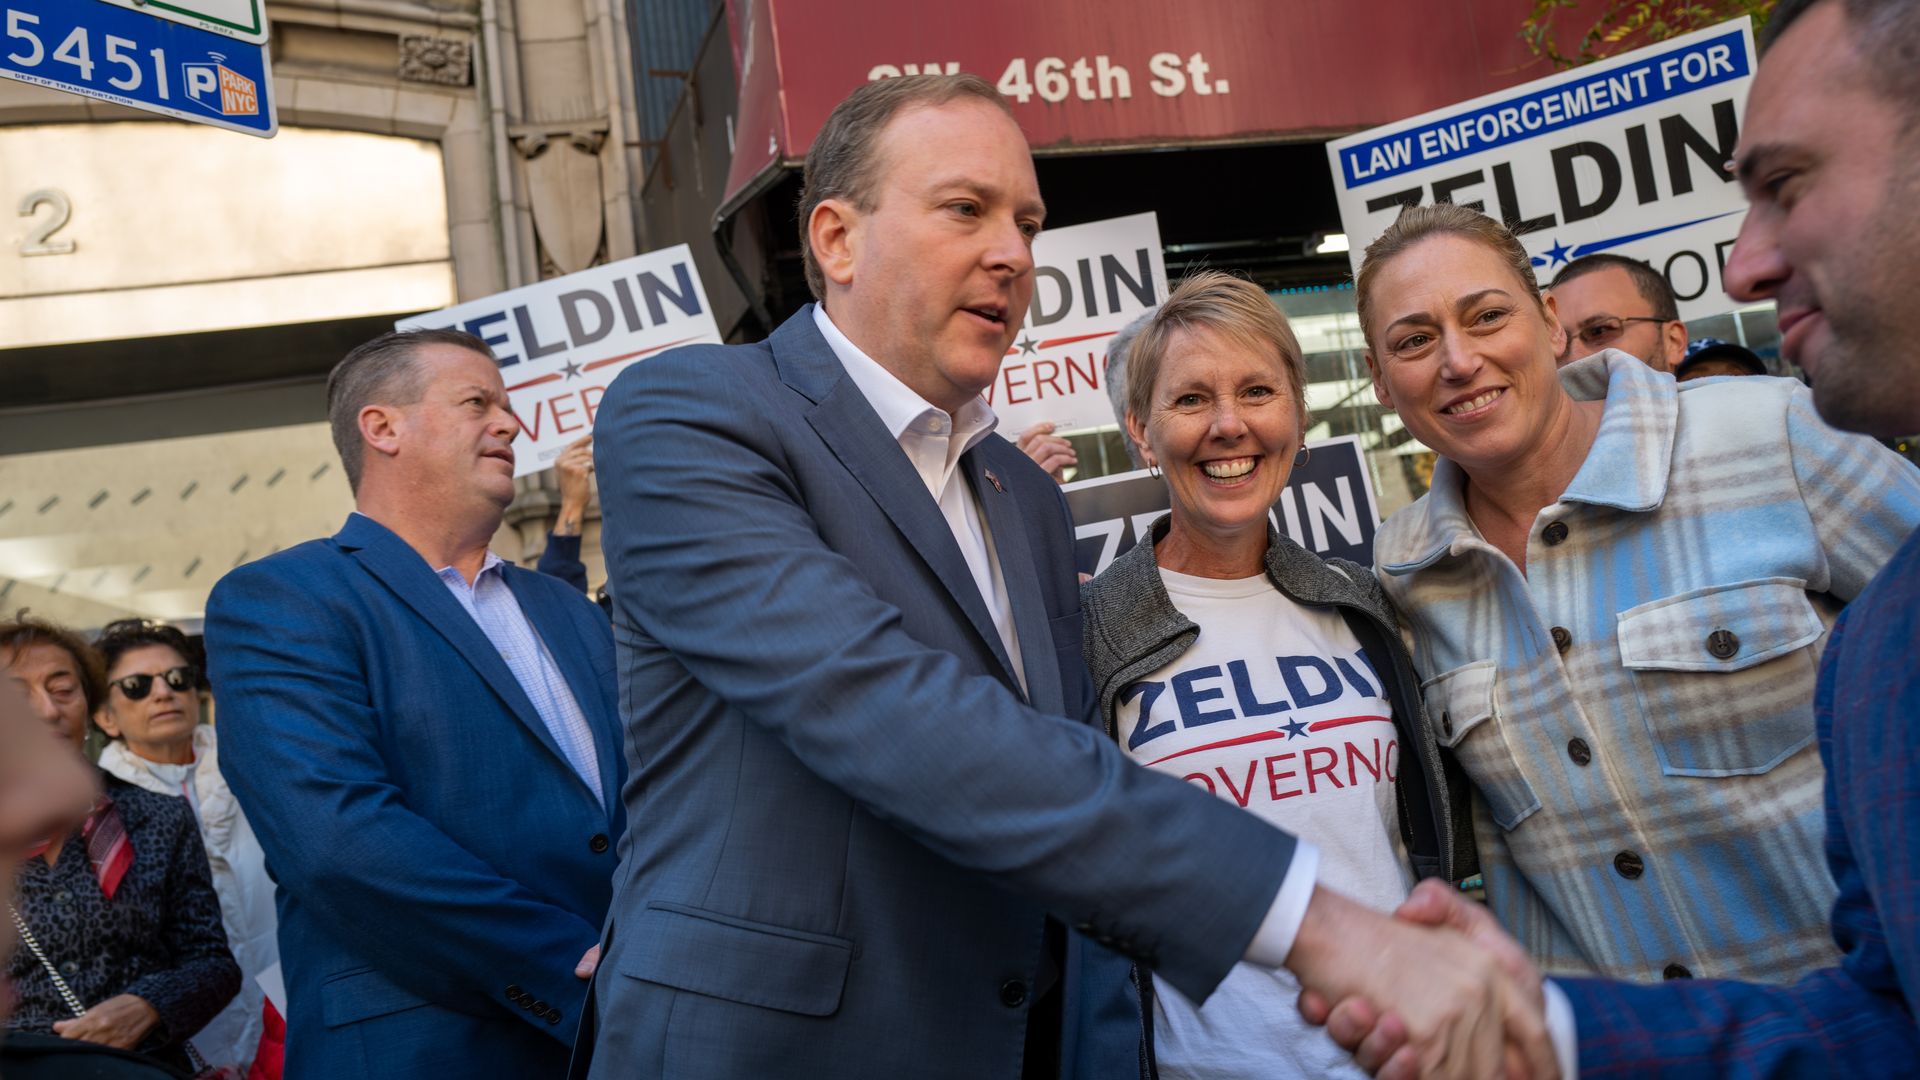 U.S. Rep. Lee Zeldin (R-NY) participates in the annual Columbus Day Parade, the largest in the country, on October 10, 2022 in New York City.